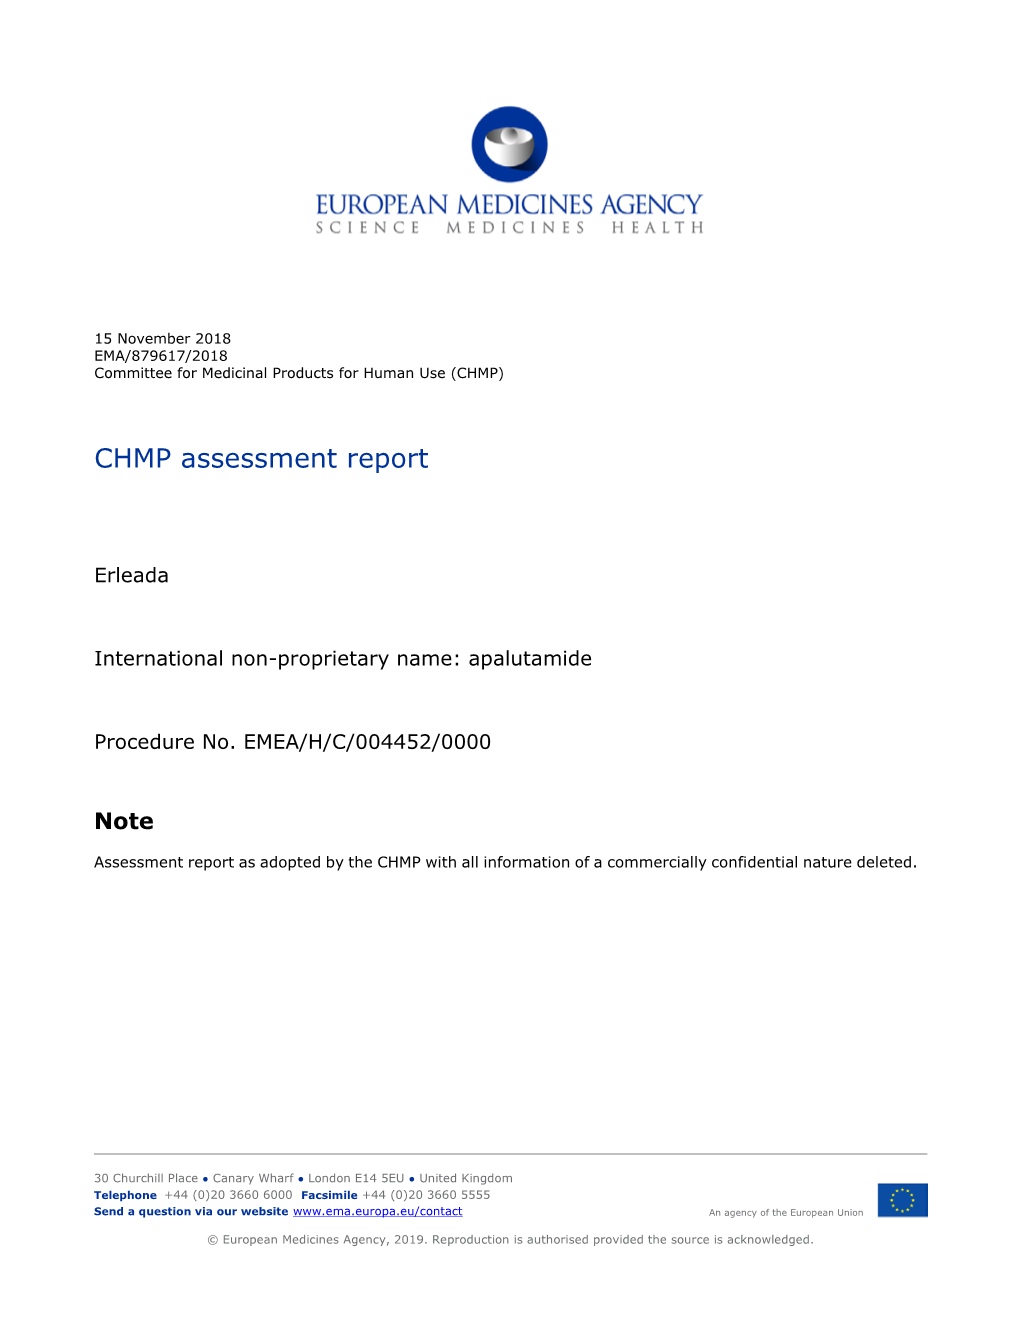 CHMP Assessment Report